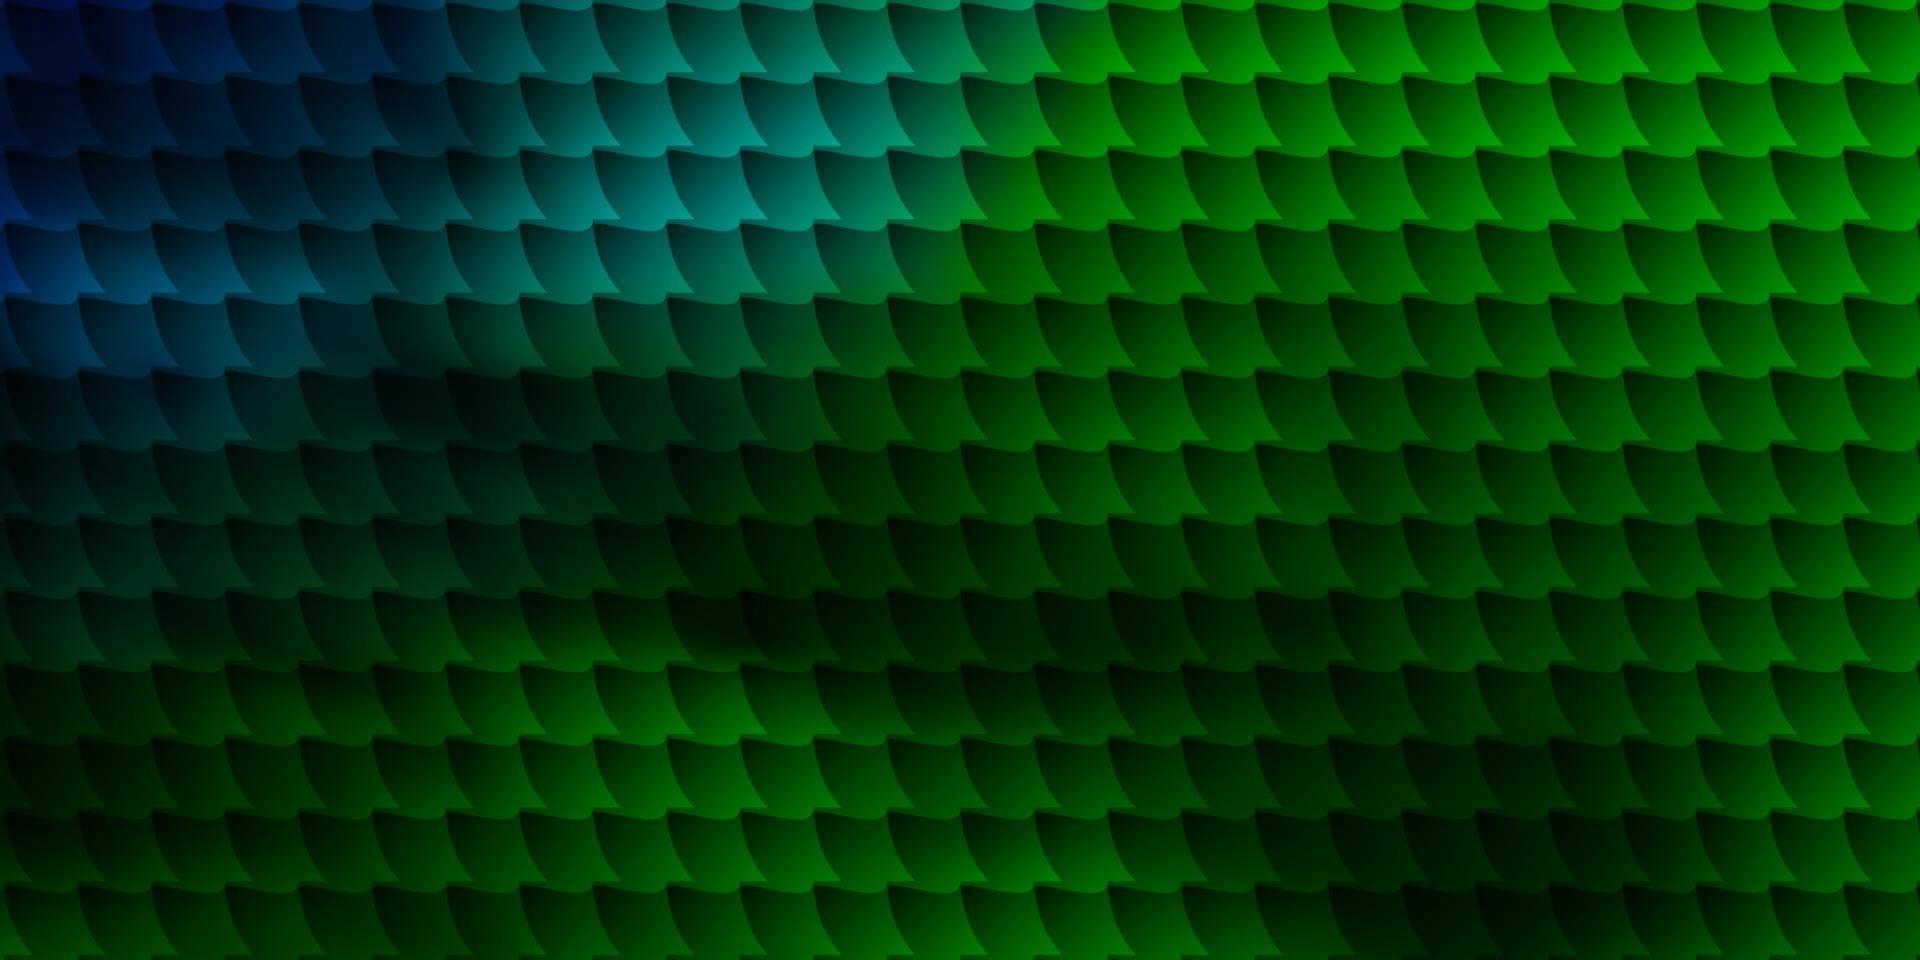 Dark Multicolor vector background with rectangles.